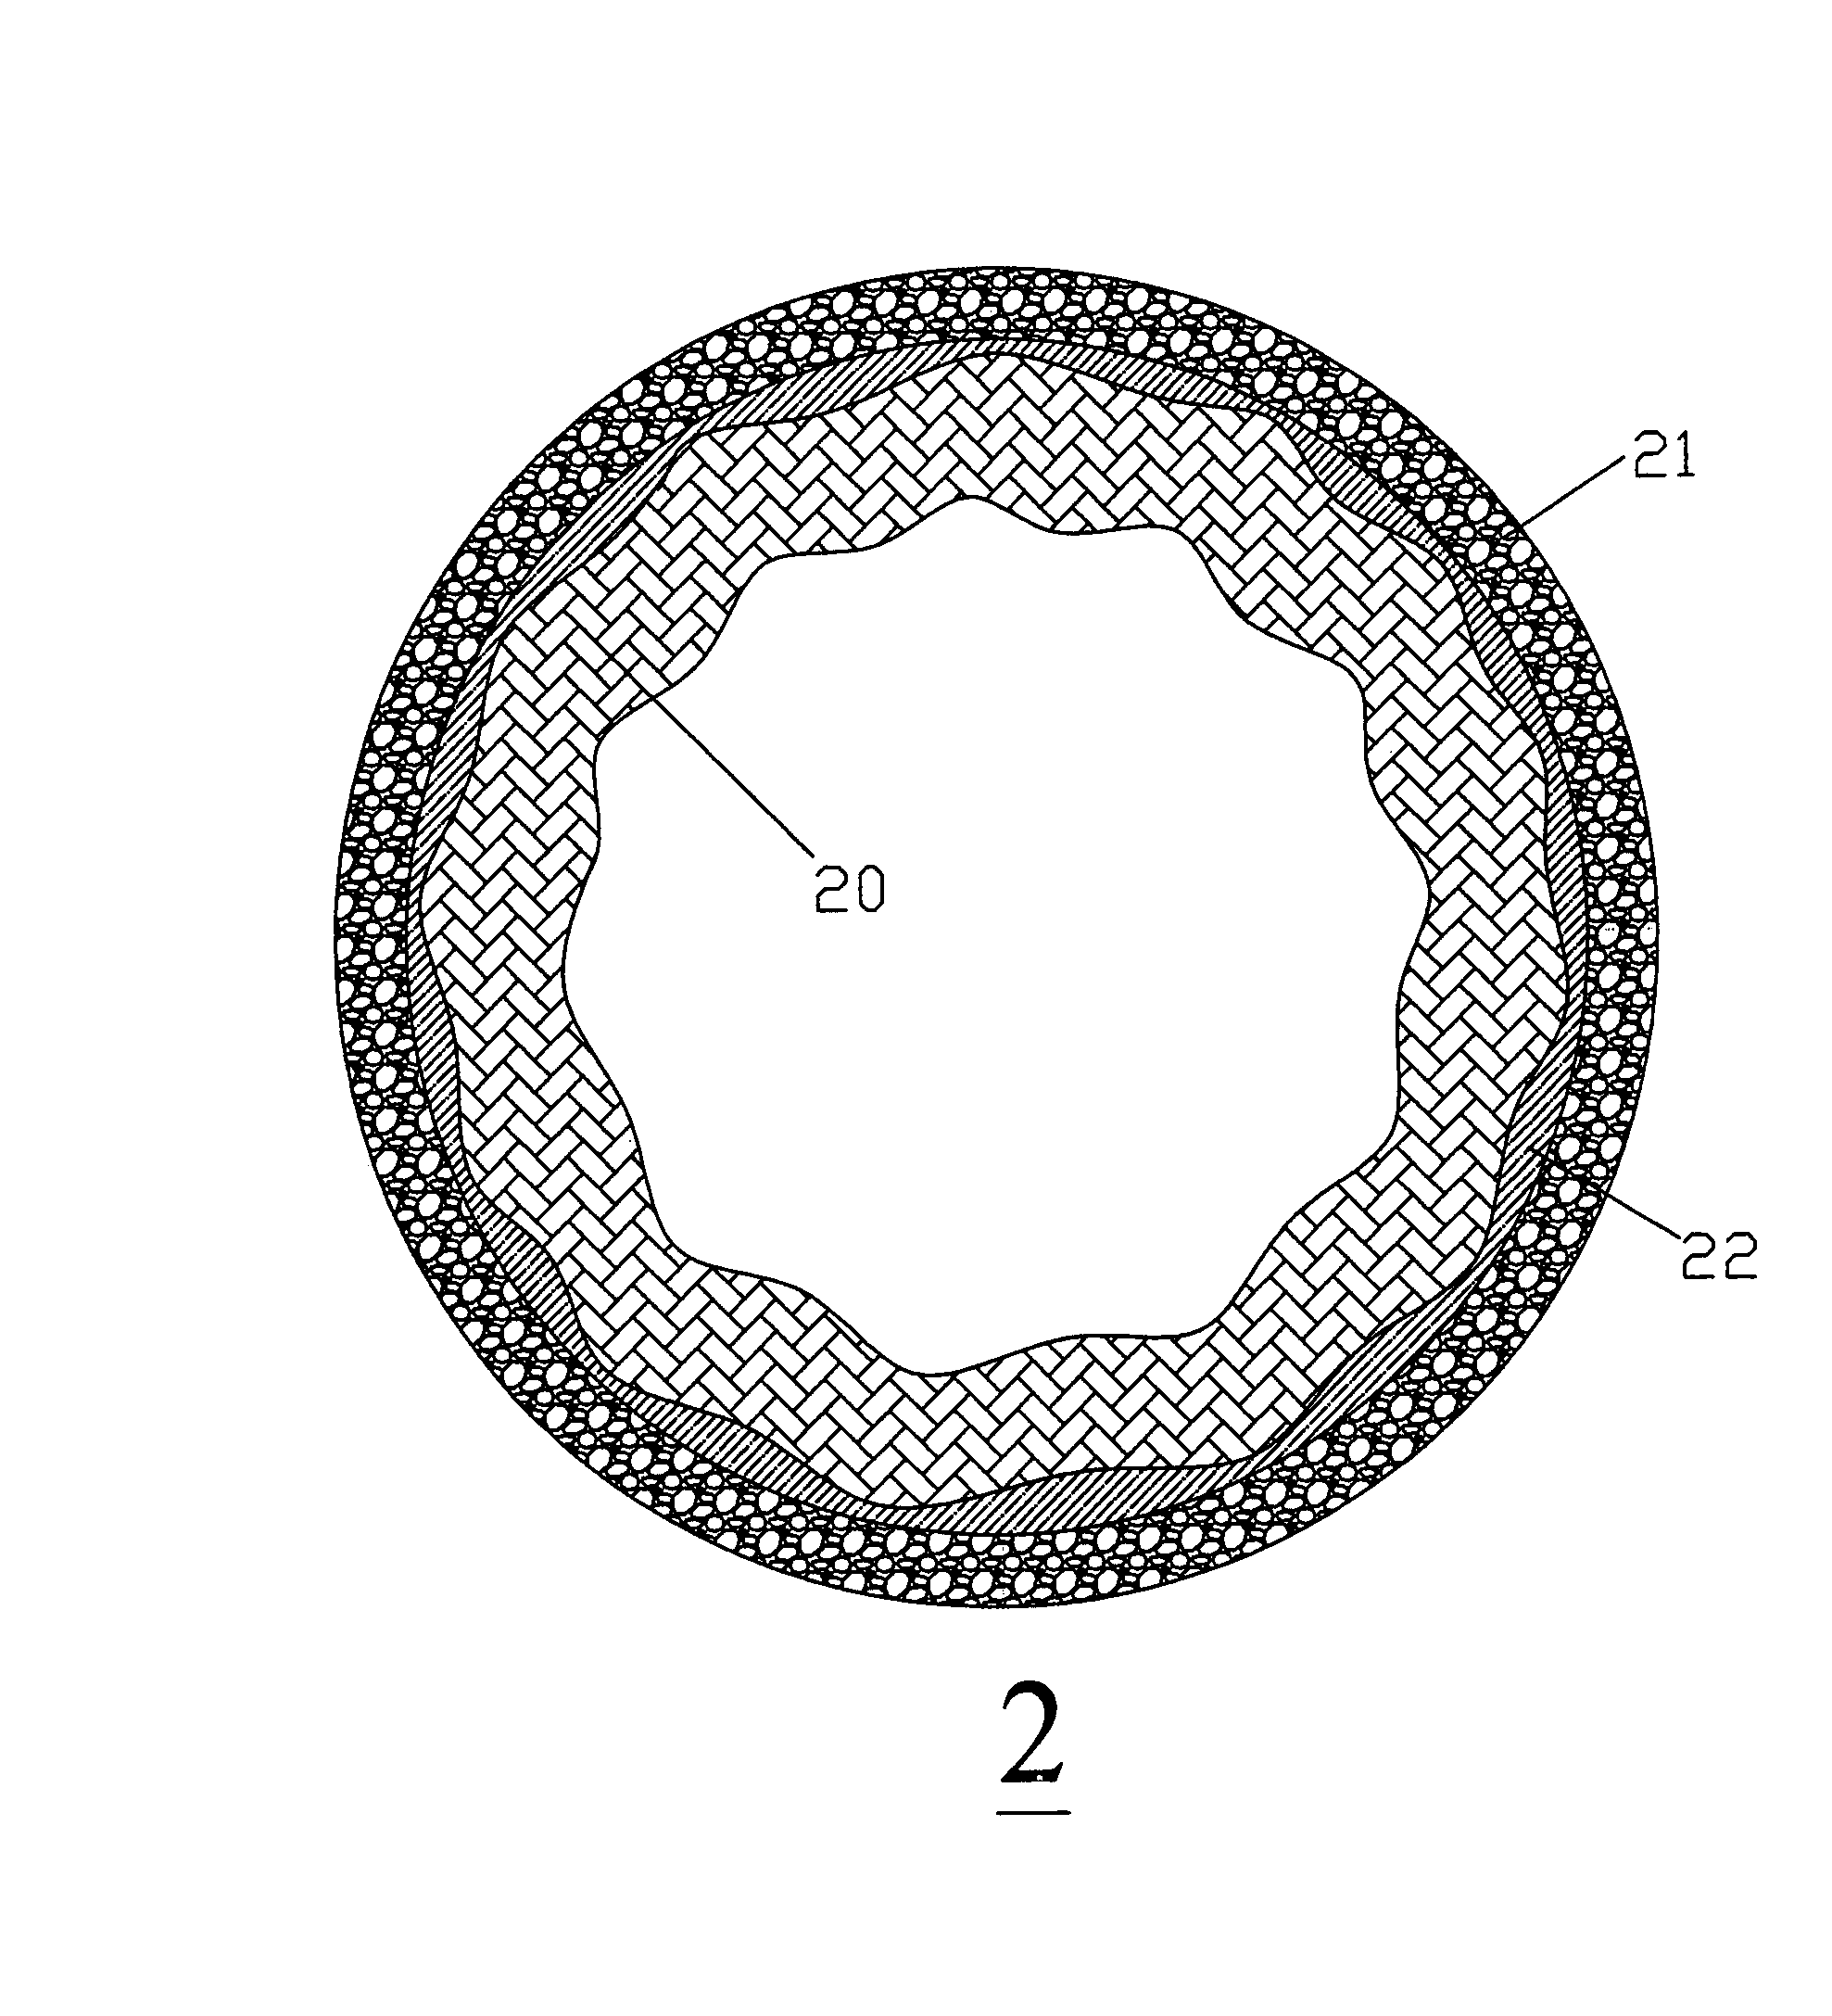 Method for producing defect free composite membranes